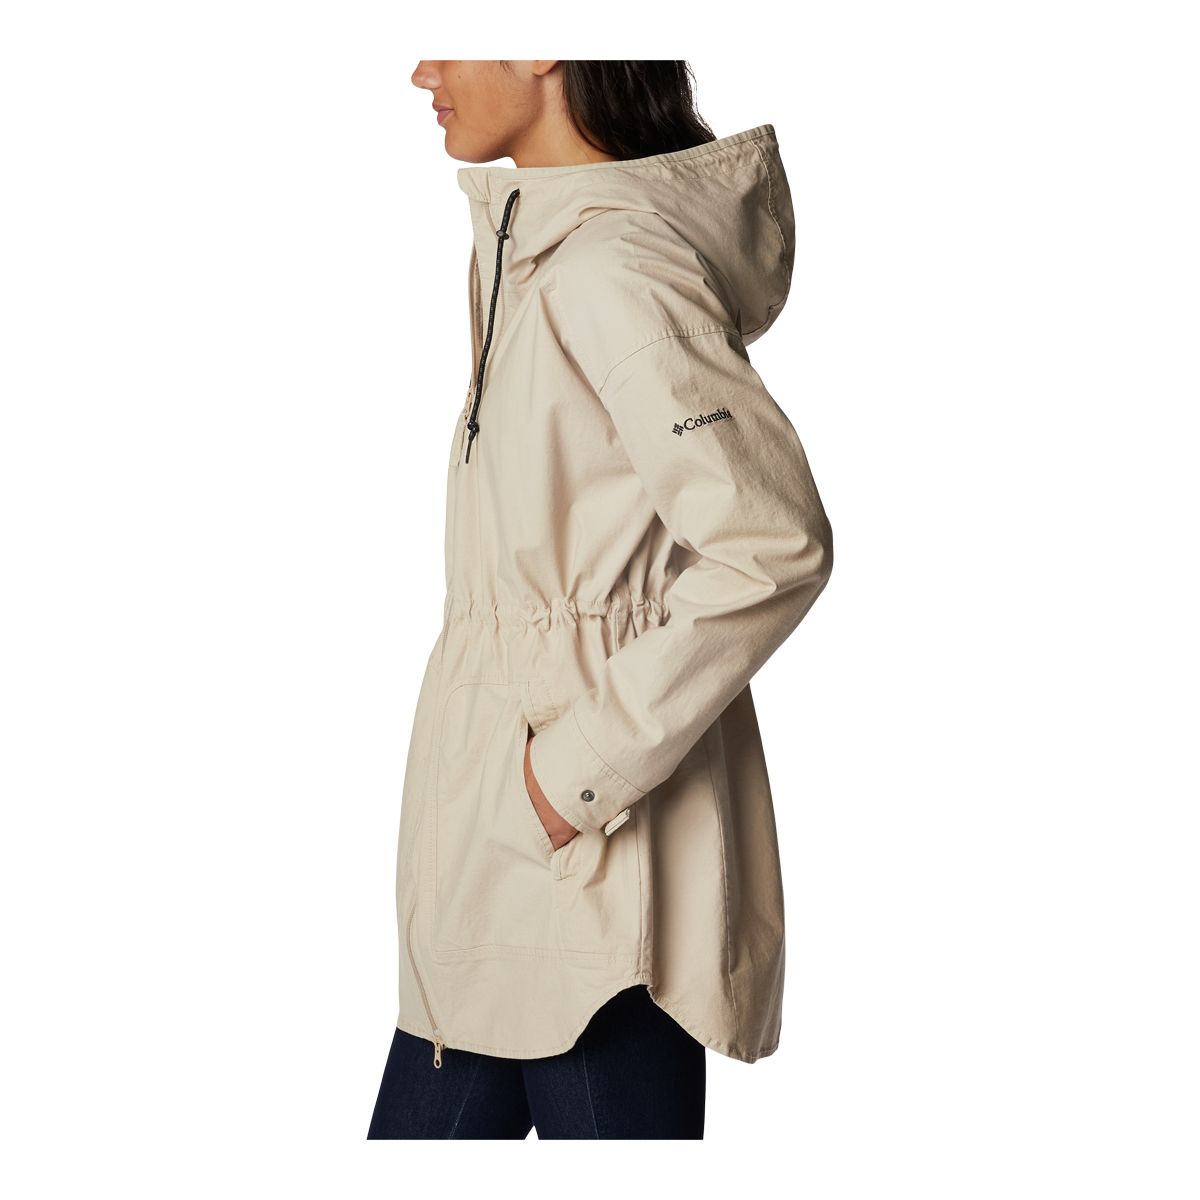 Womens Jackets & Coats Online in SA